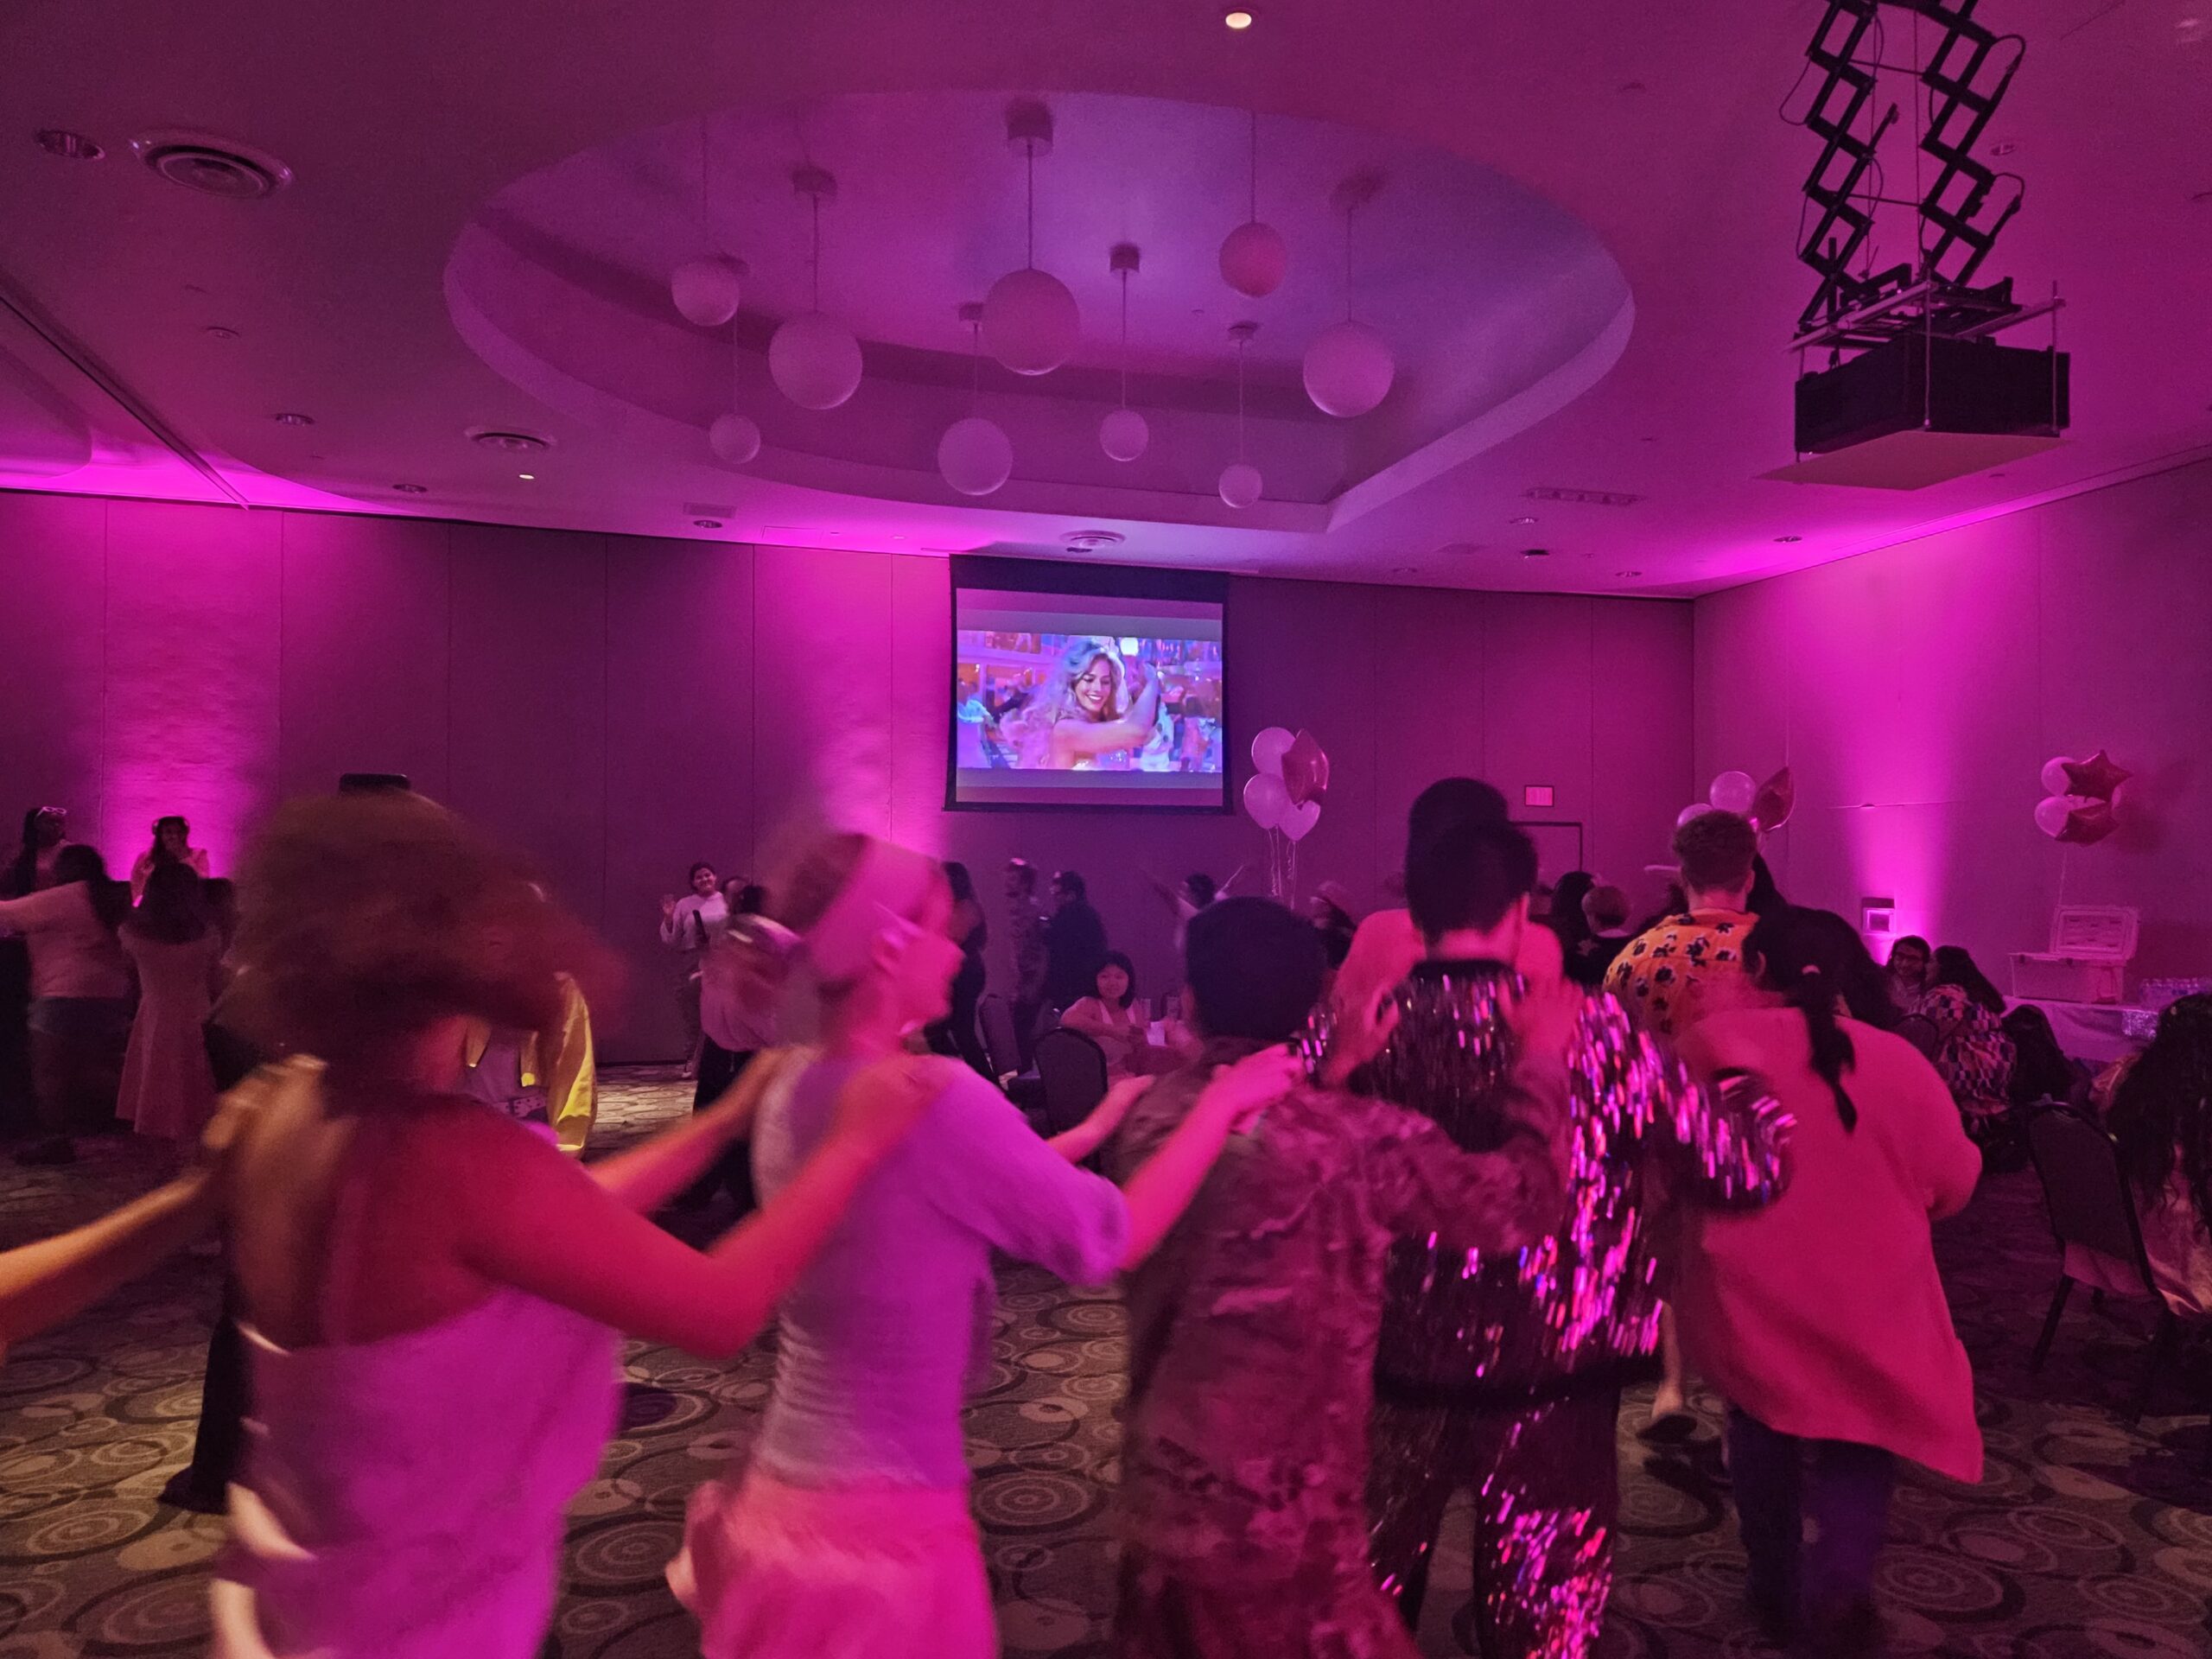 Photo of a room bathed in pink light with people dancing a conga line